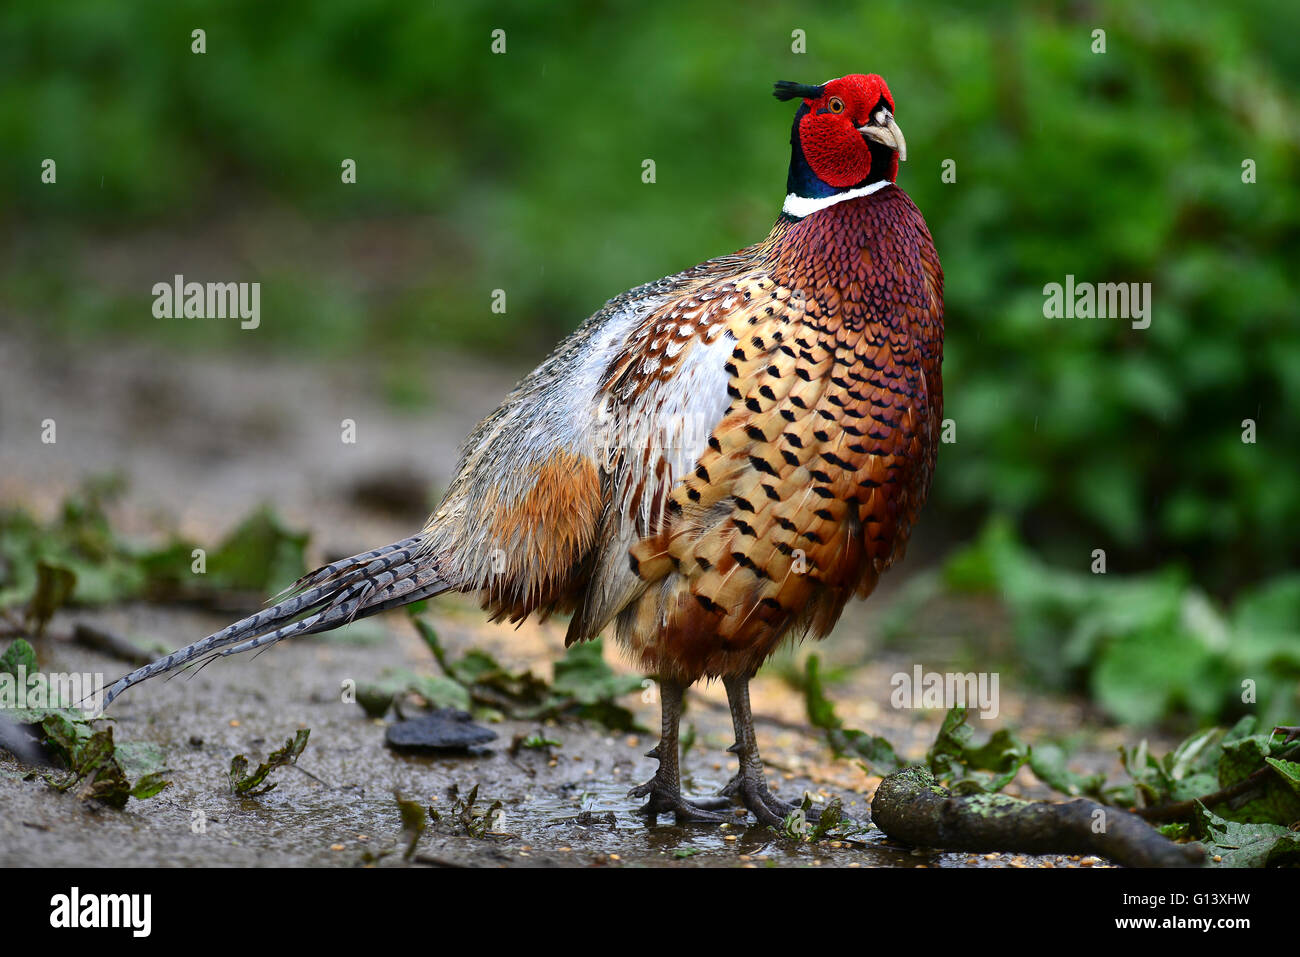 A common pheasant walking in some mud UK Stock Photo